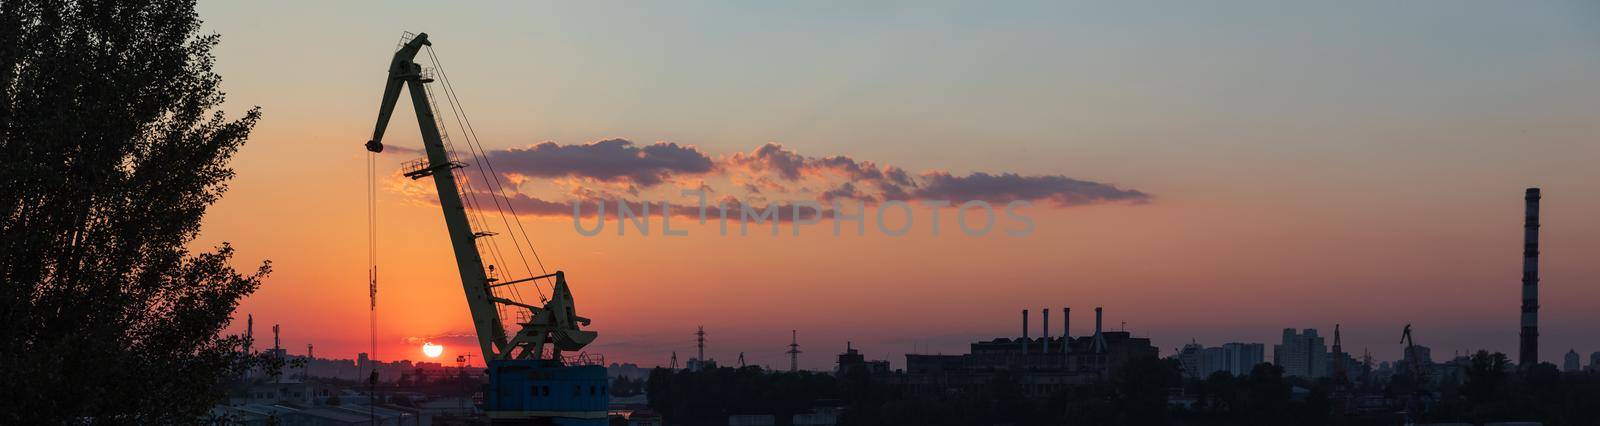 Sunset at industrial district of Kiev in Podil district by palinchak